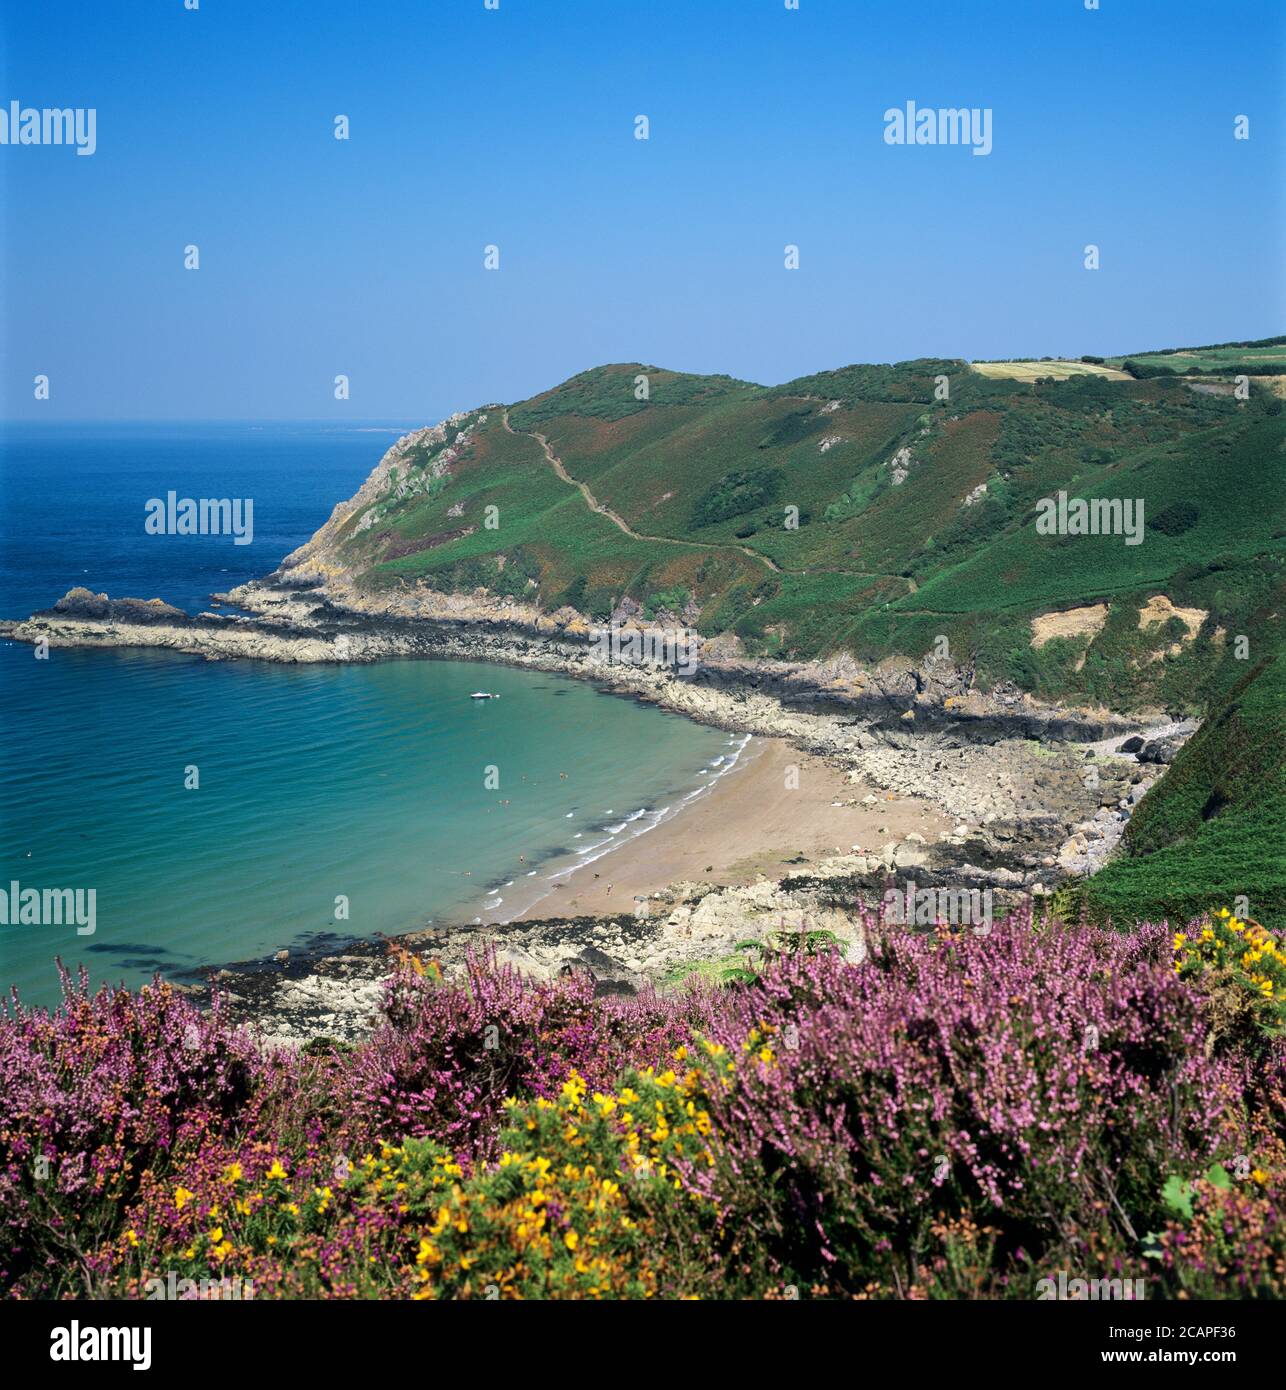 View over Giffard Bay with heather and yellow gorse, Bonne Nuit Bay, North  Coast, Jersey, Channel Islands, United Kingdom, Europe Stock Photo - Alamy